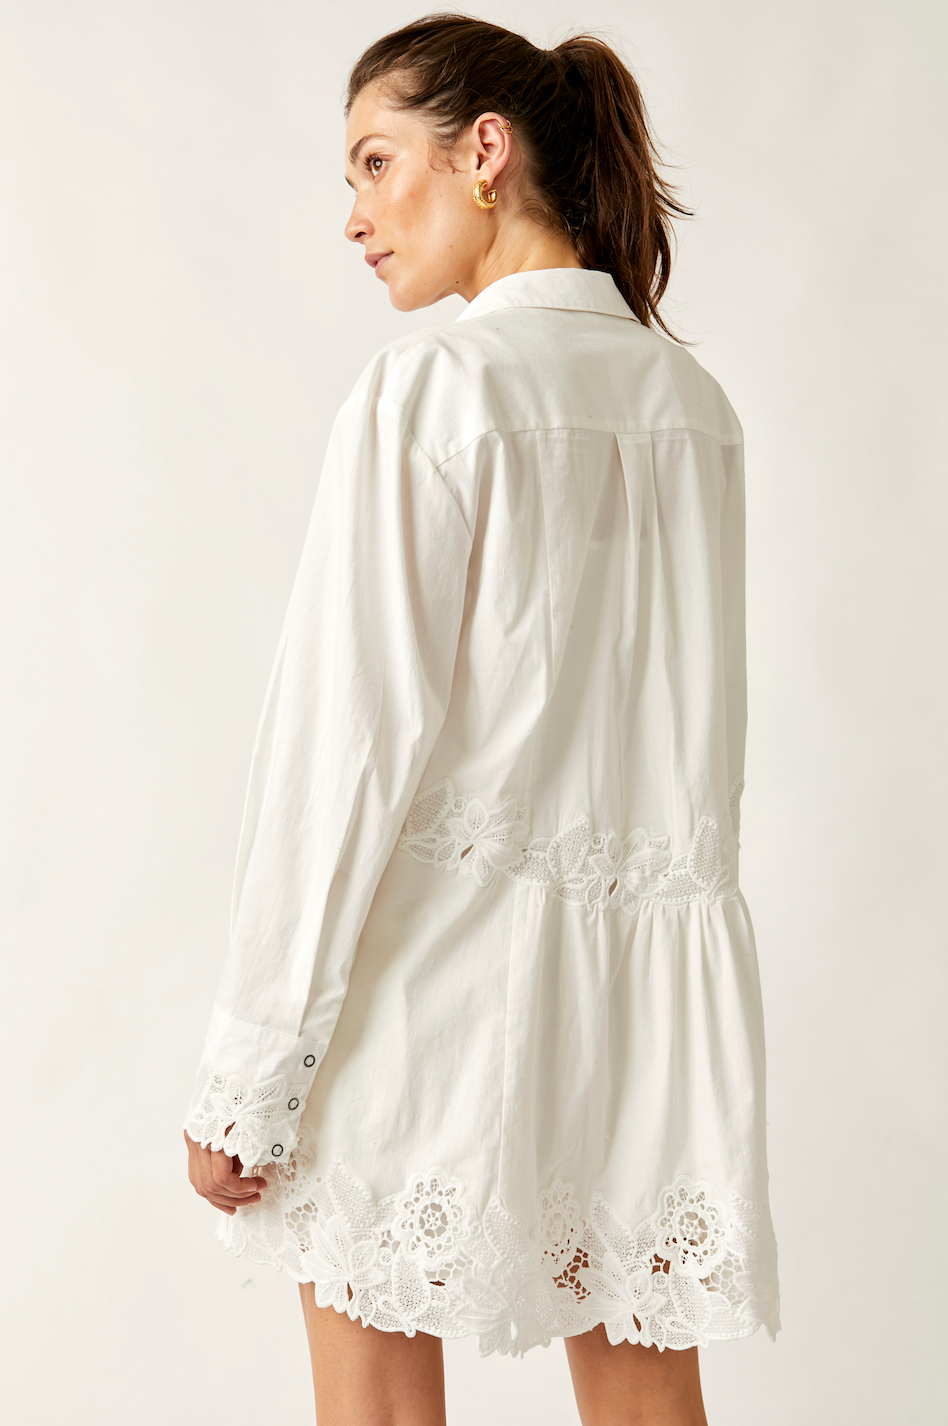 FREE PEOPLE CONSTANCE MINI DRESS IN WHITE